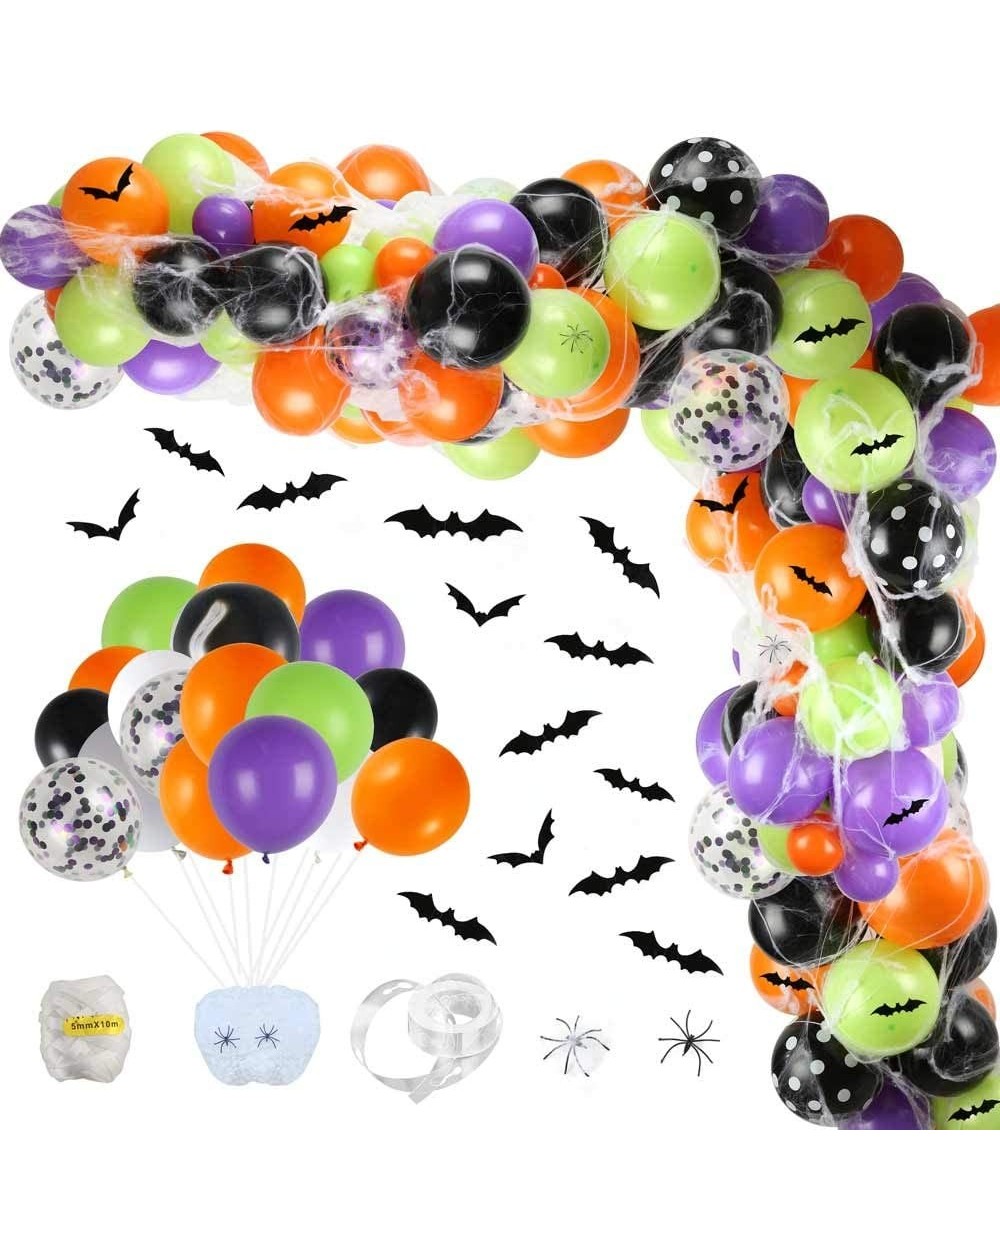 Balloons 155 Pieces Halloween Balloon Garland Arch Kit Include Latex Balloons- Confetti Balloons- Spider Web- 3D Bats for Hal...